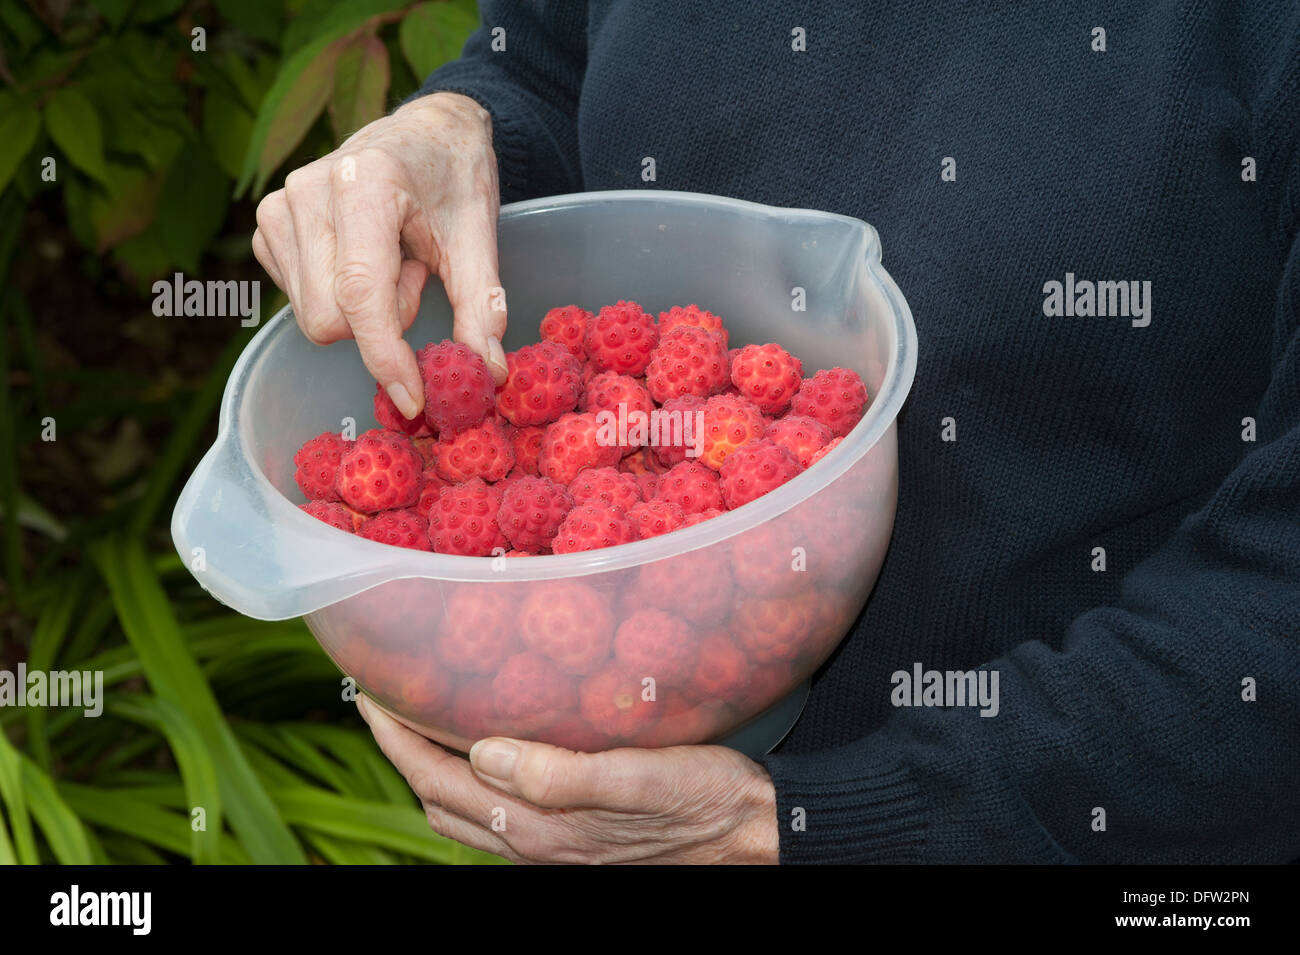 Harvesting ripe fruits of the Kousa Dogwood Tree Woman's hand sorting the fruit for preparation for jelly making Stock Photo